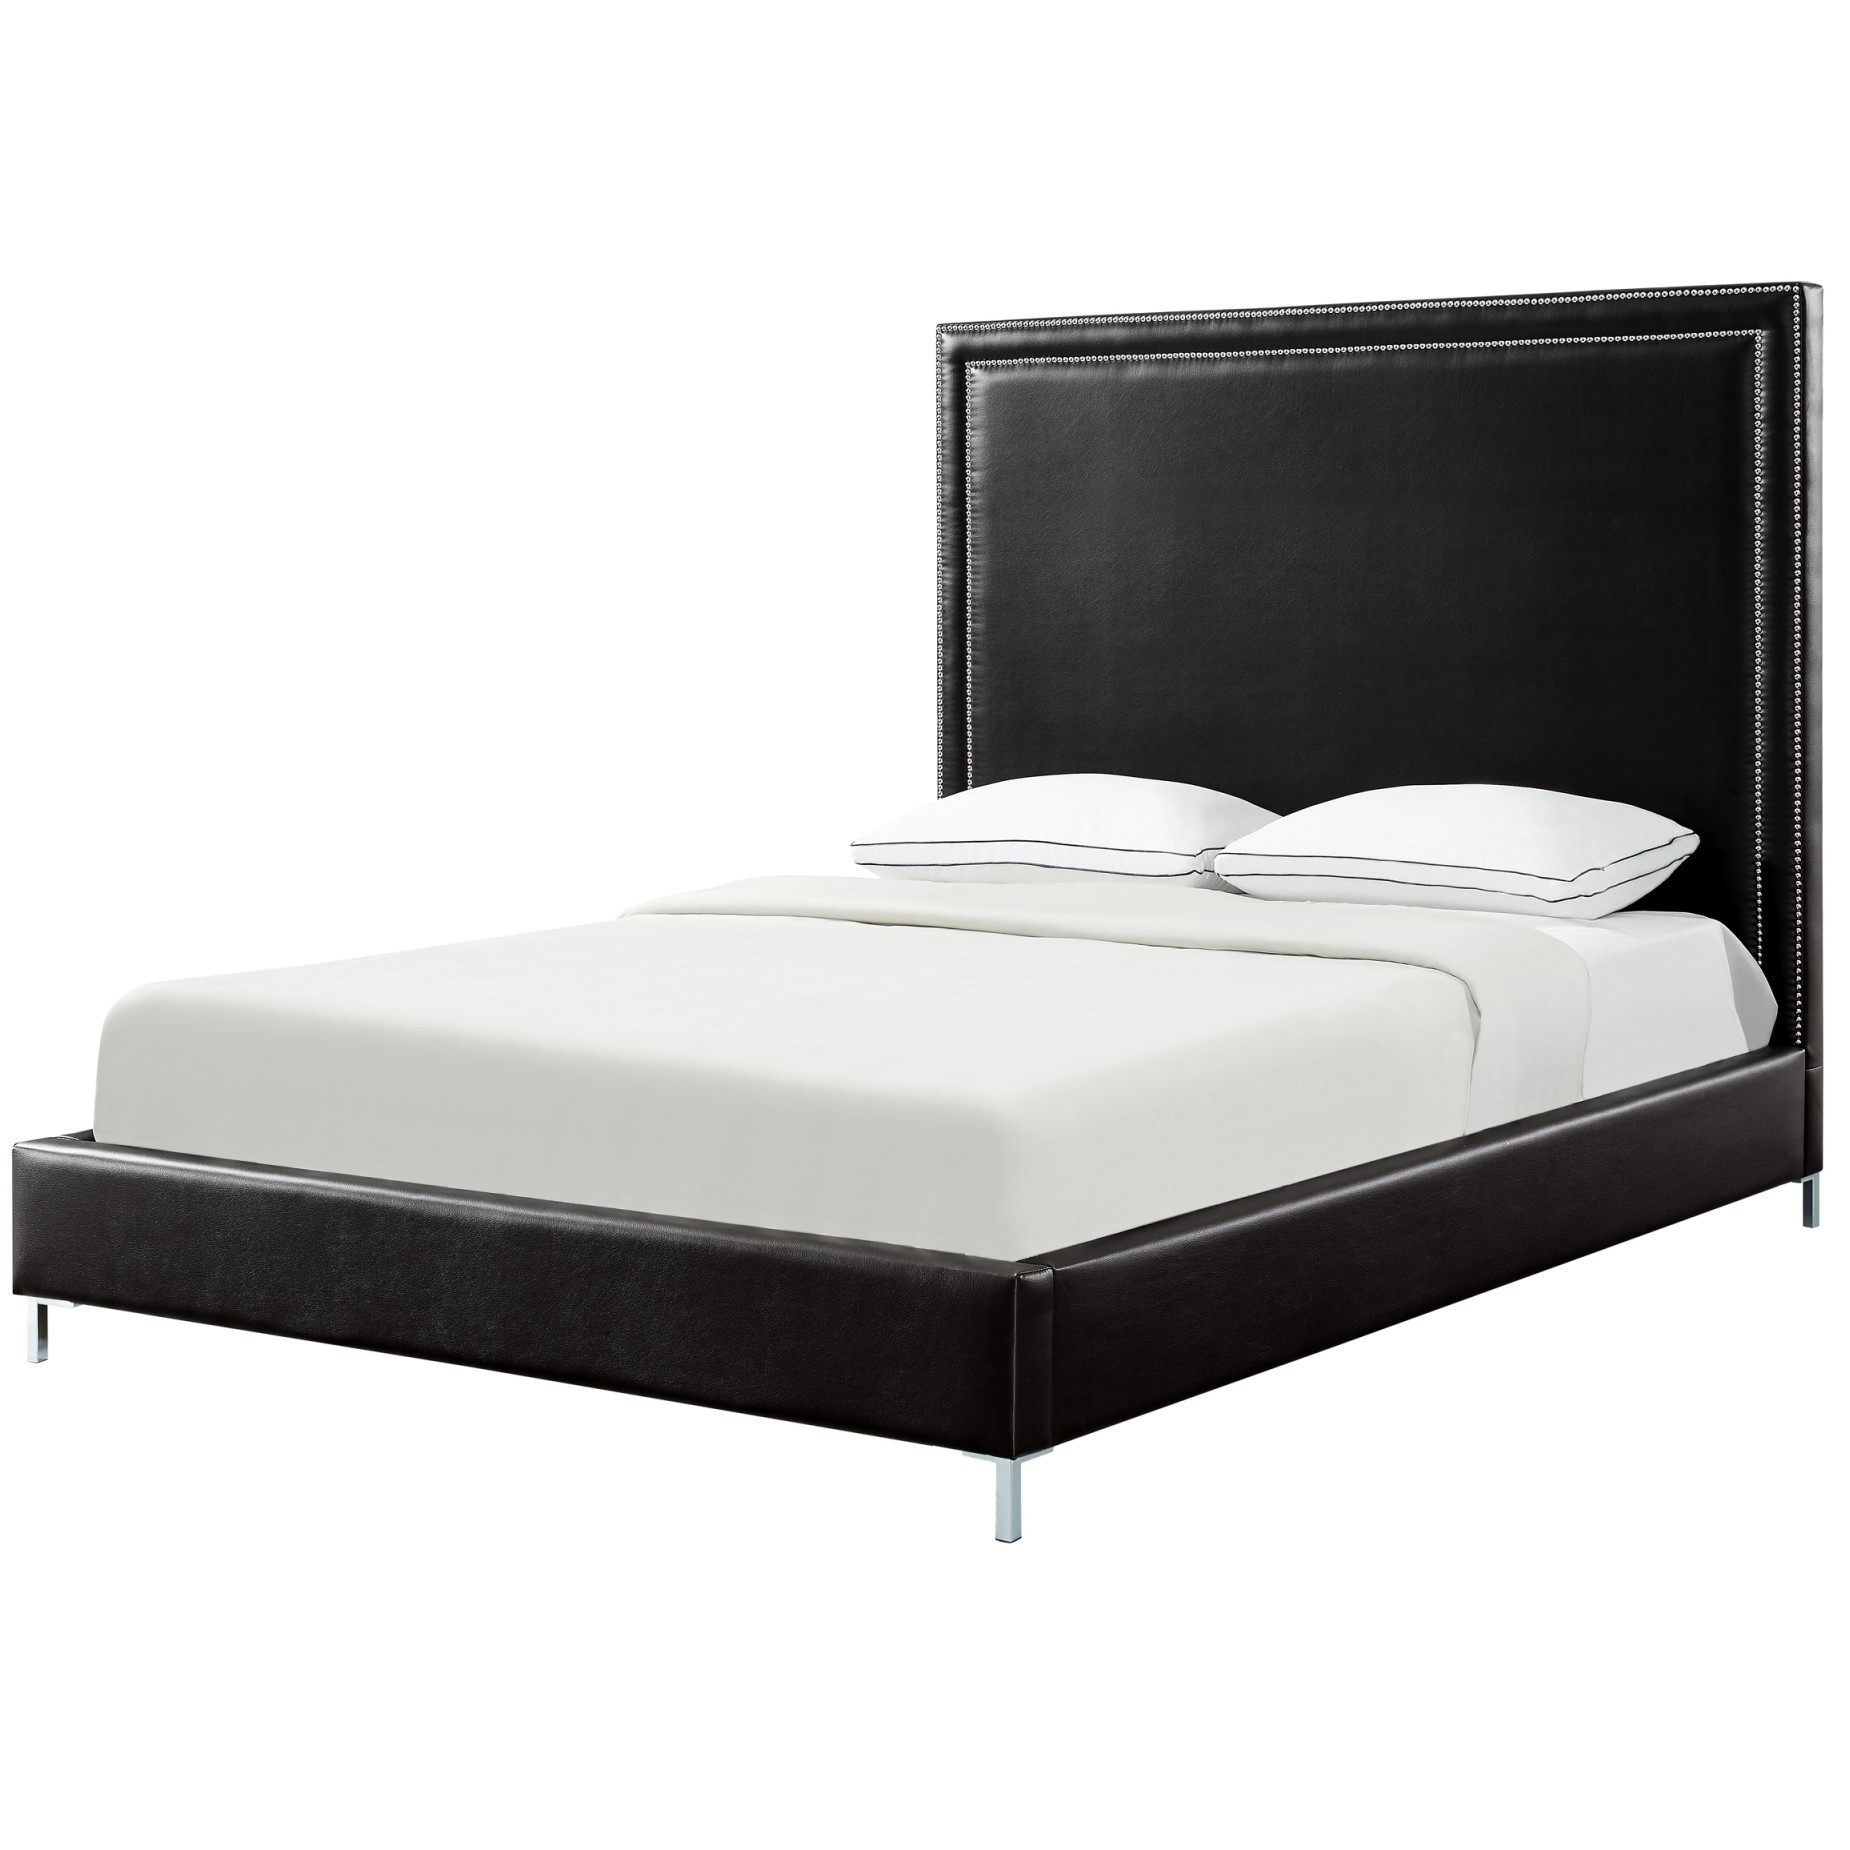 Black Solid Wood Queen Upholstered Faux Leather Bed with Nailhead Trim-544780-1